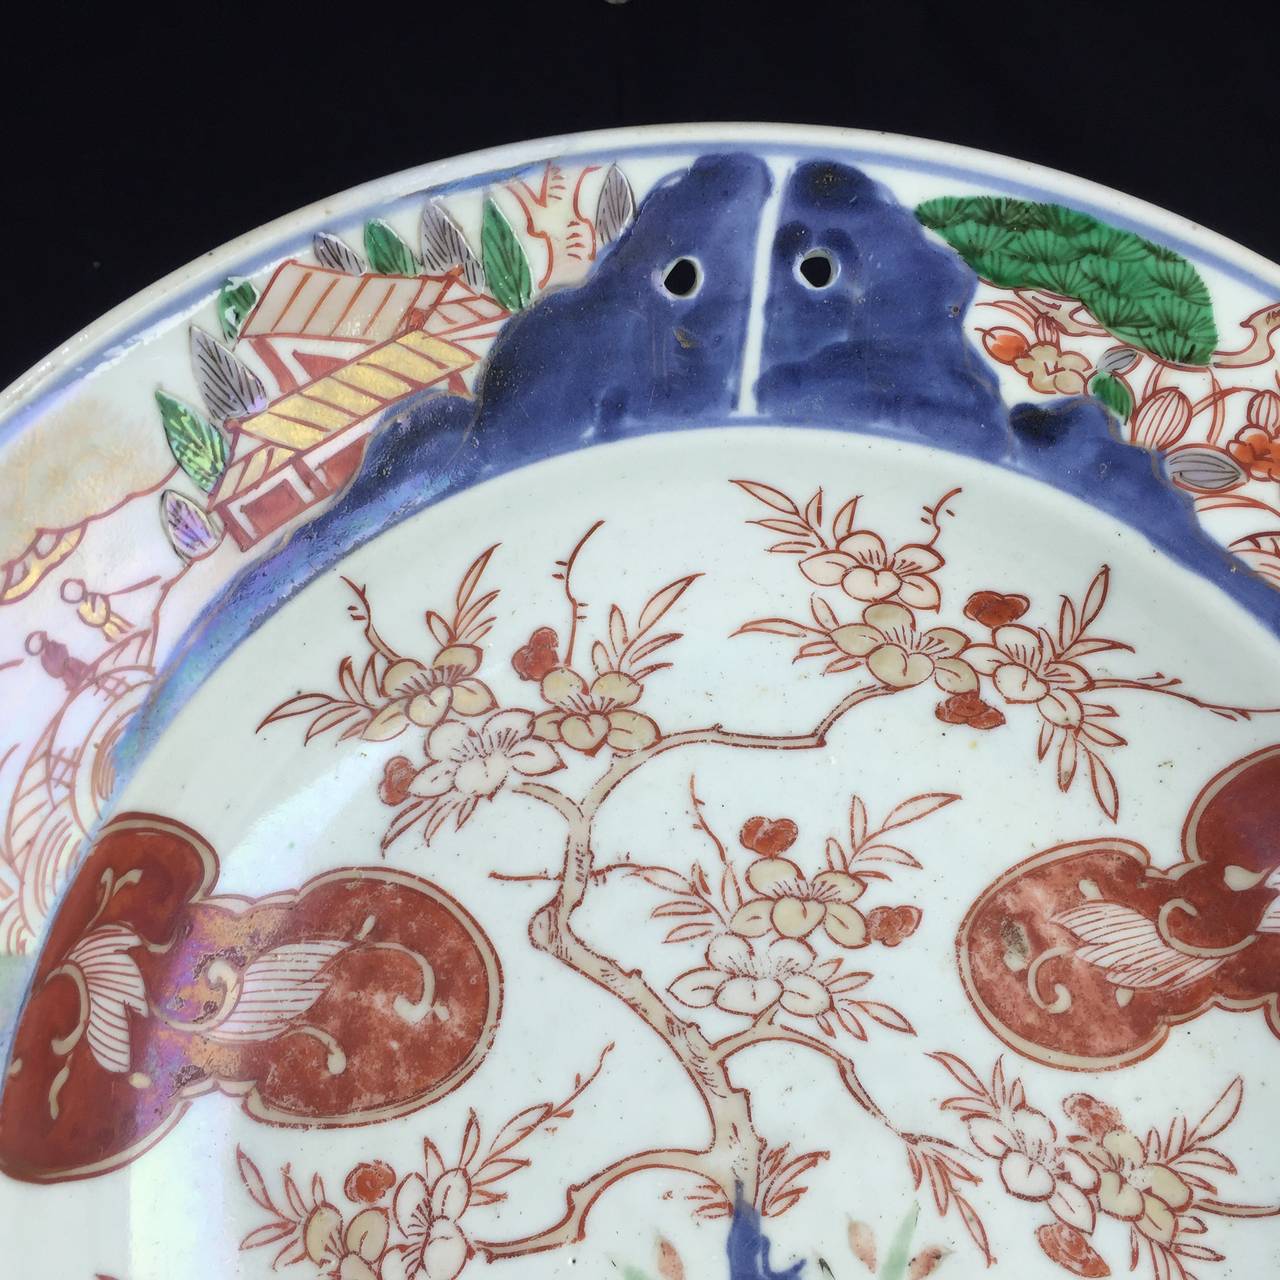 Rare Japanese Imari barbers bowl, made for the Western market, decorated with a vase of flowers on a table, the border with panels of garden scenes, the rim with two holes for hanging it up,
Circa 1680.